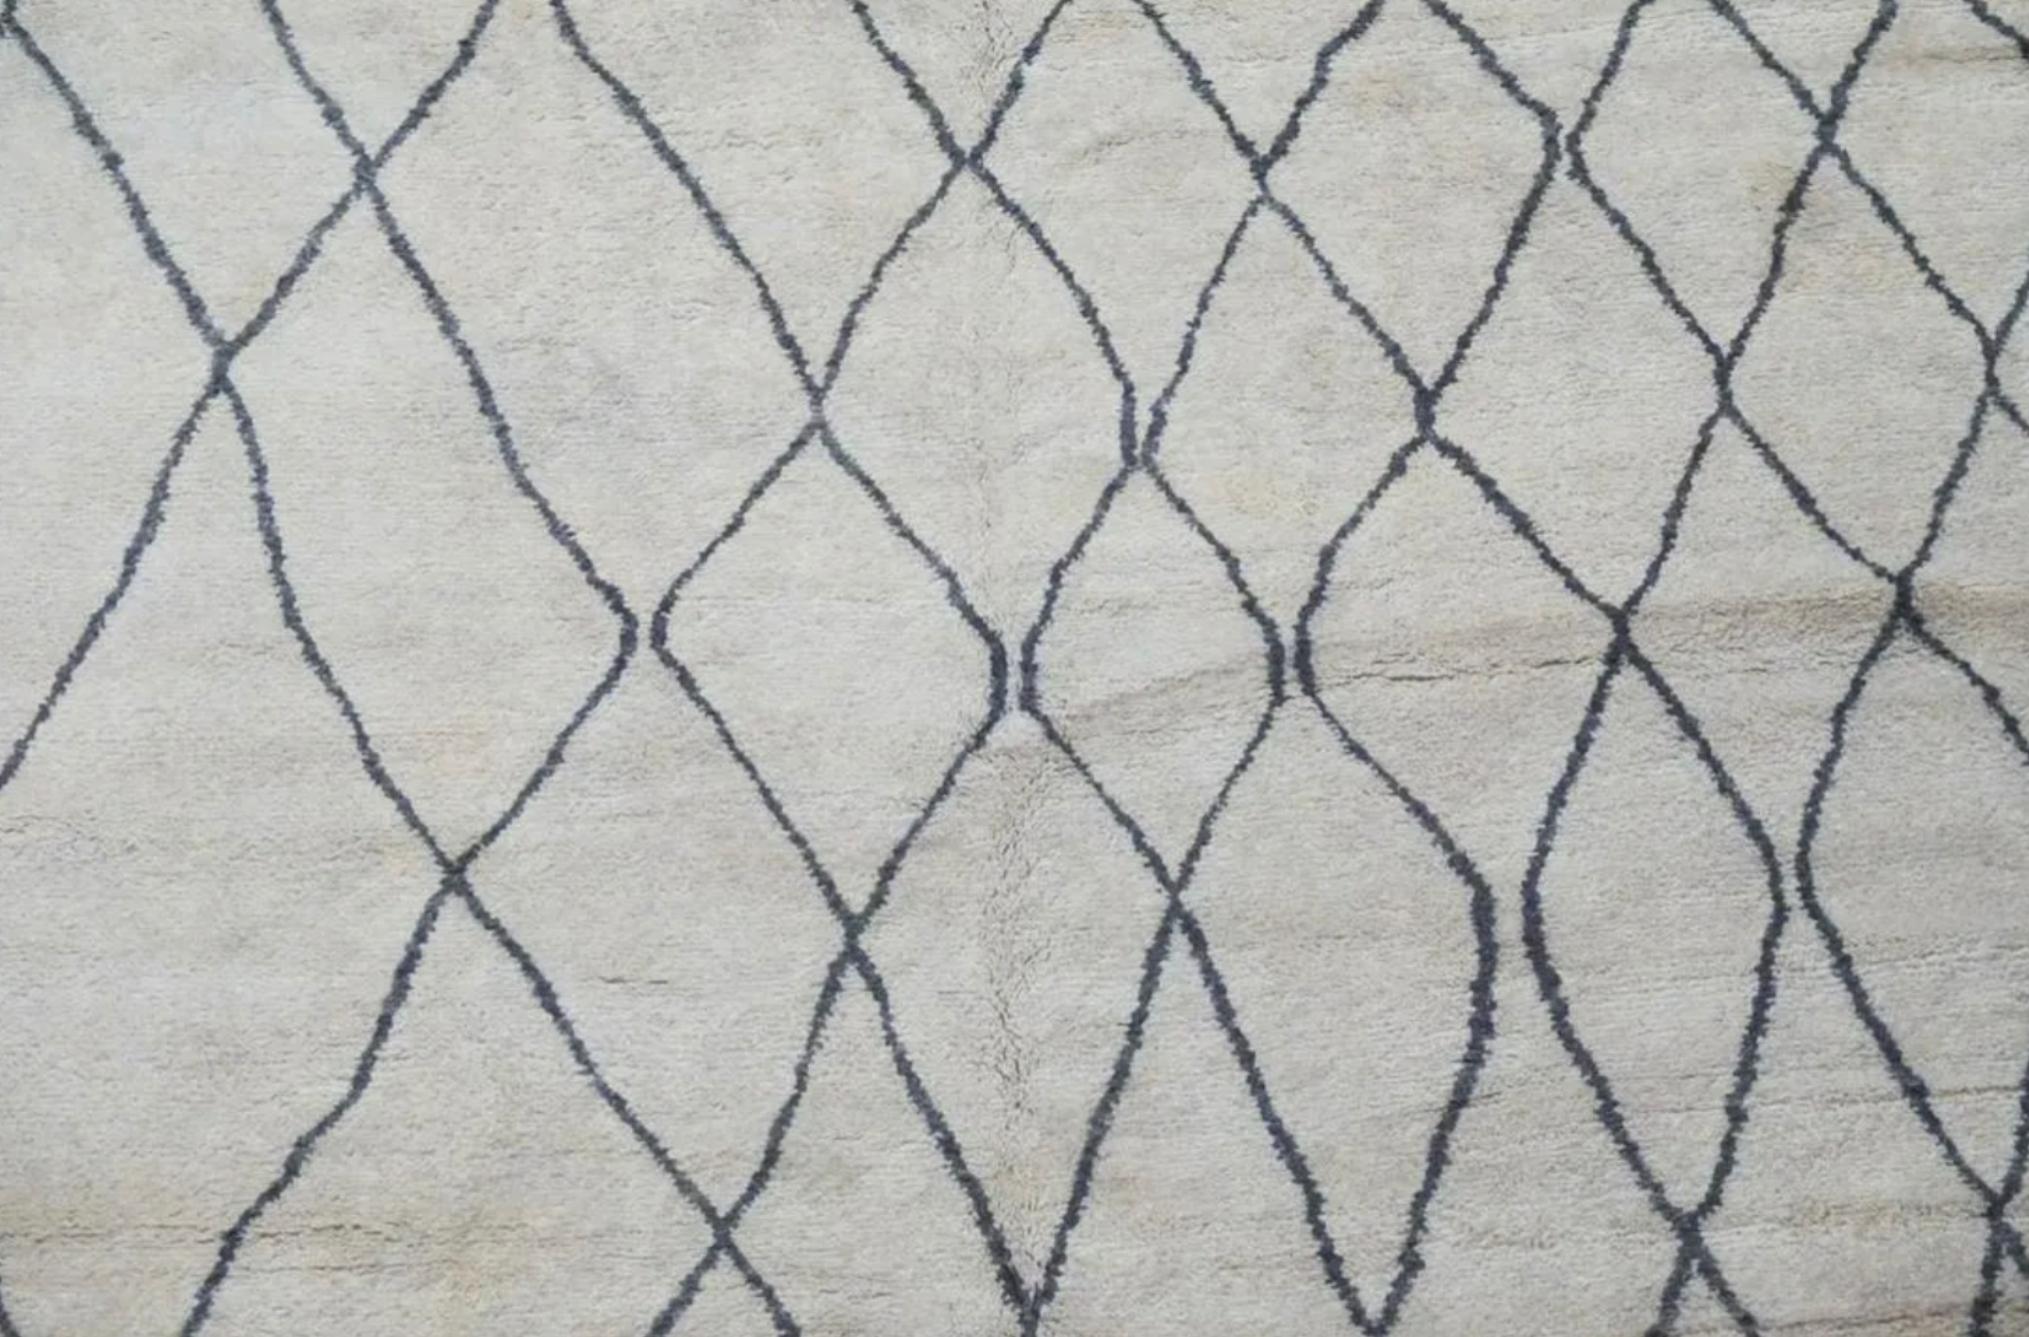 Age: New
Condition: Excellent
Field color: Ivory
Accent color: Gray
Technique: Hand-knotted
Pile: Wool
Foundation: Cotton

Size: 9' x 12'.